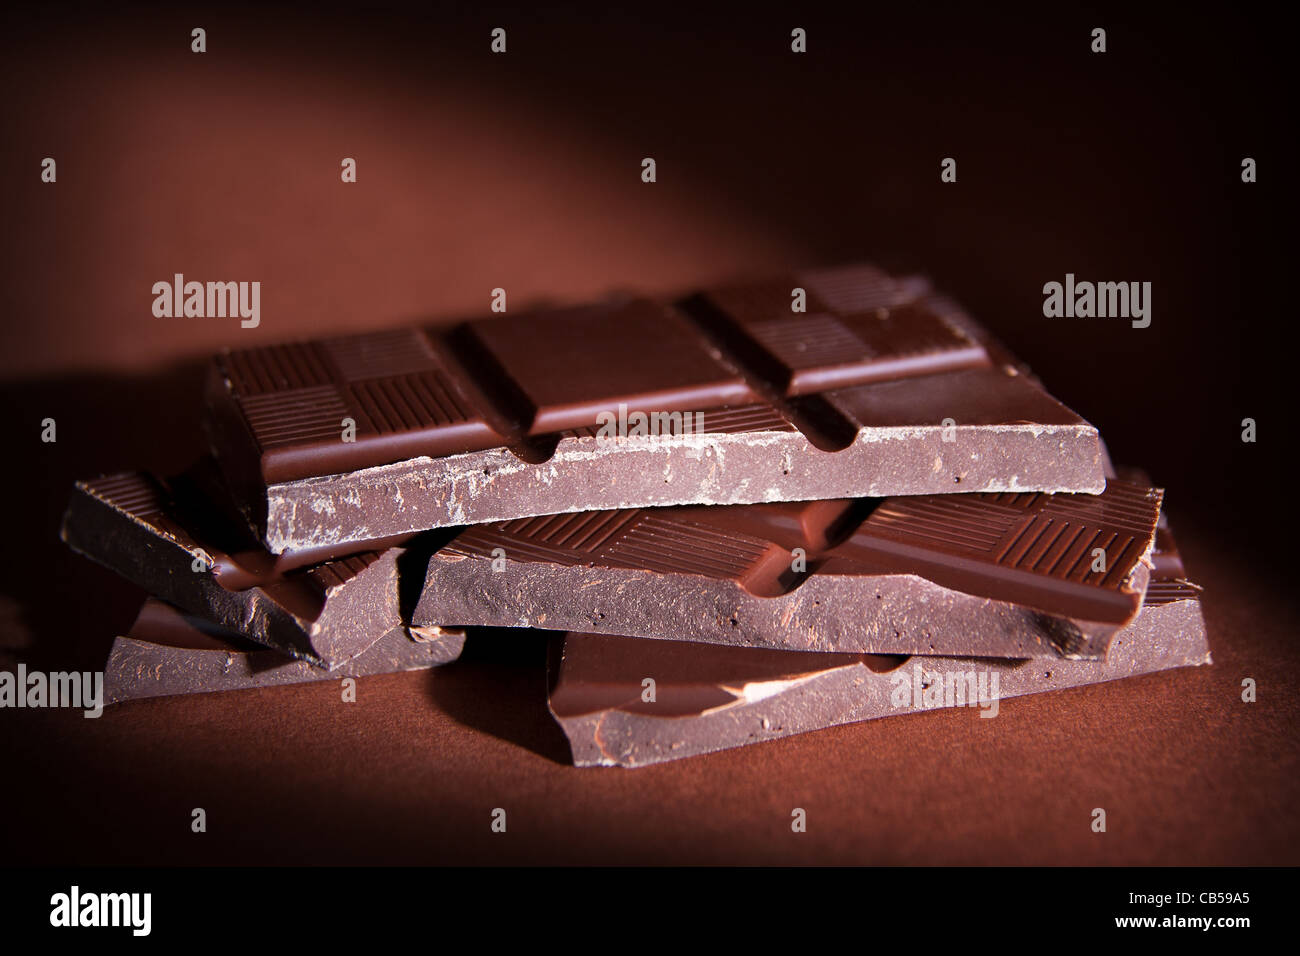 Chocolate bars on brown background Stock Photo